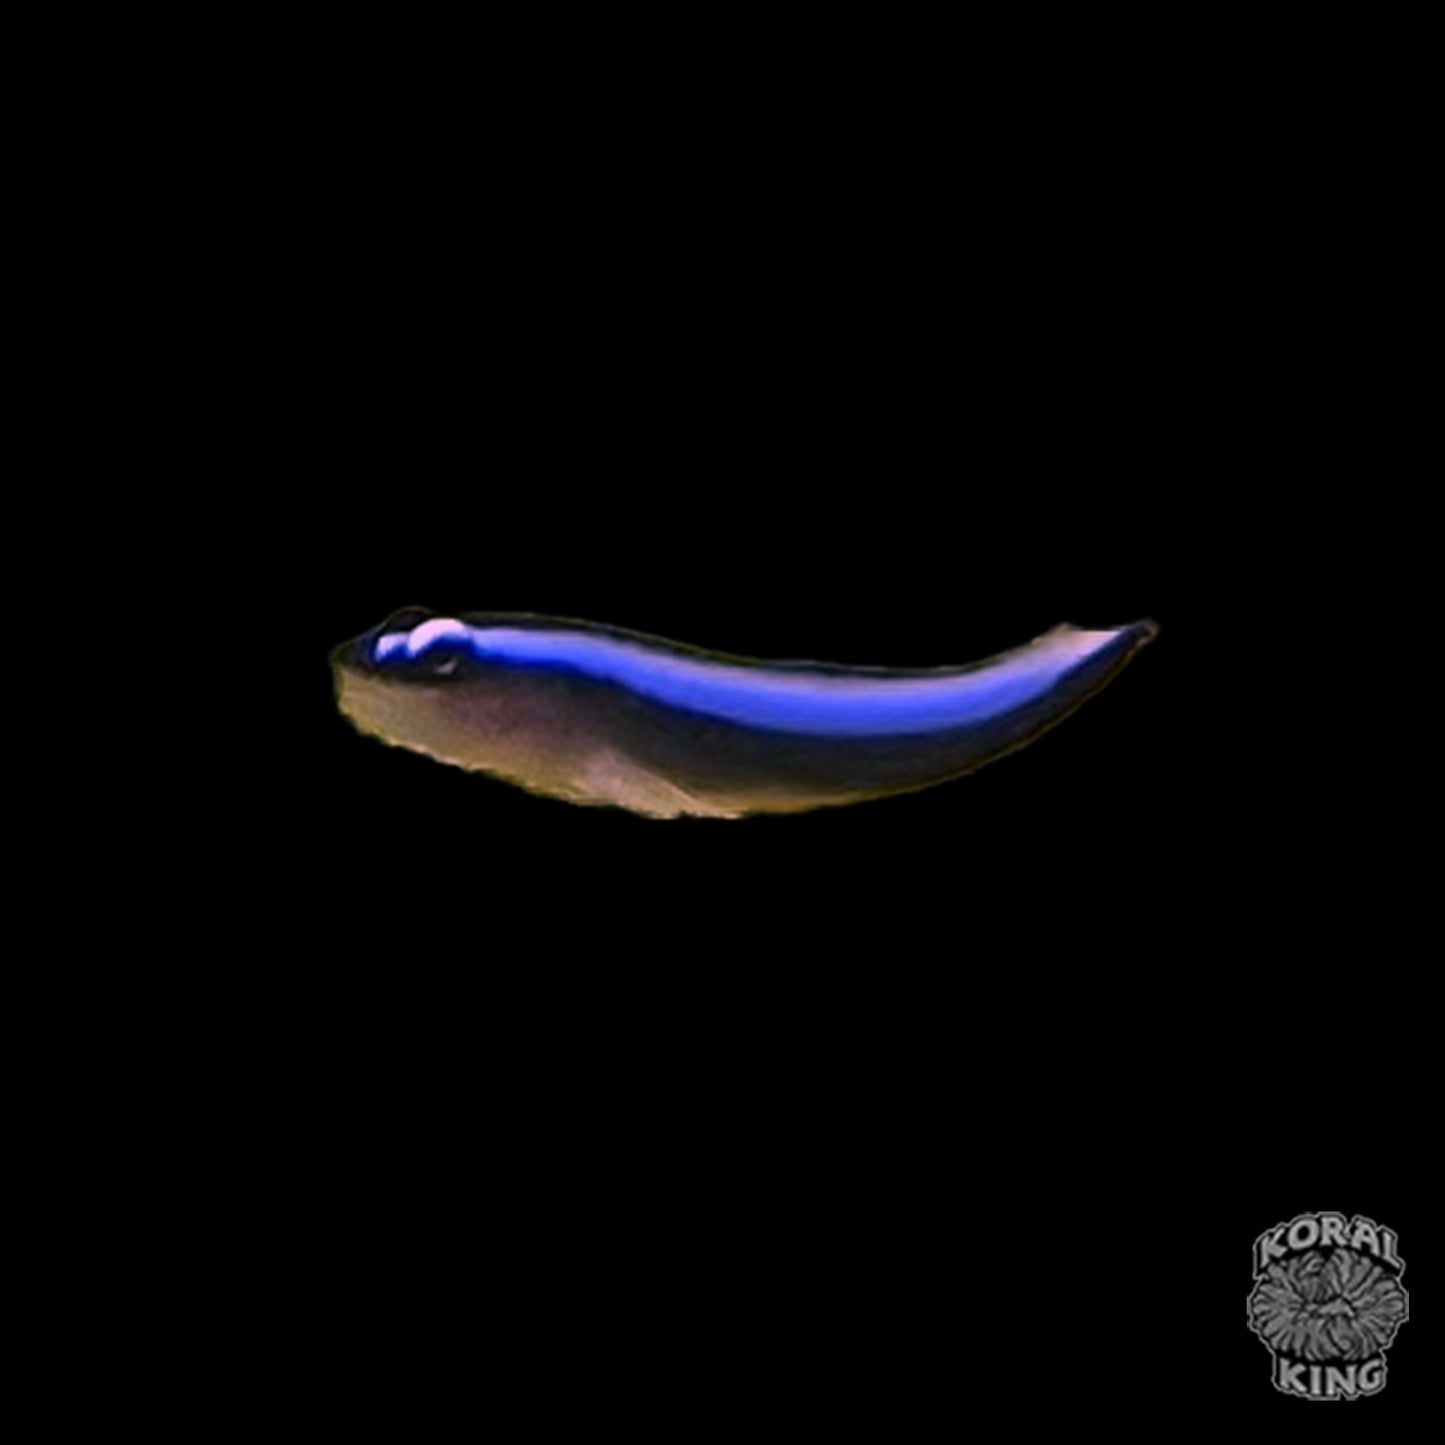 Neon Blue Cleaner Goby - Koral King